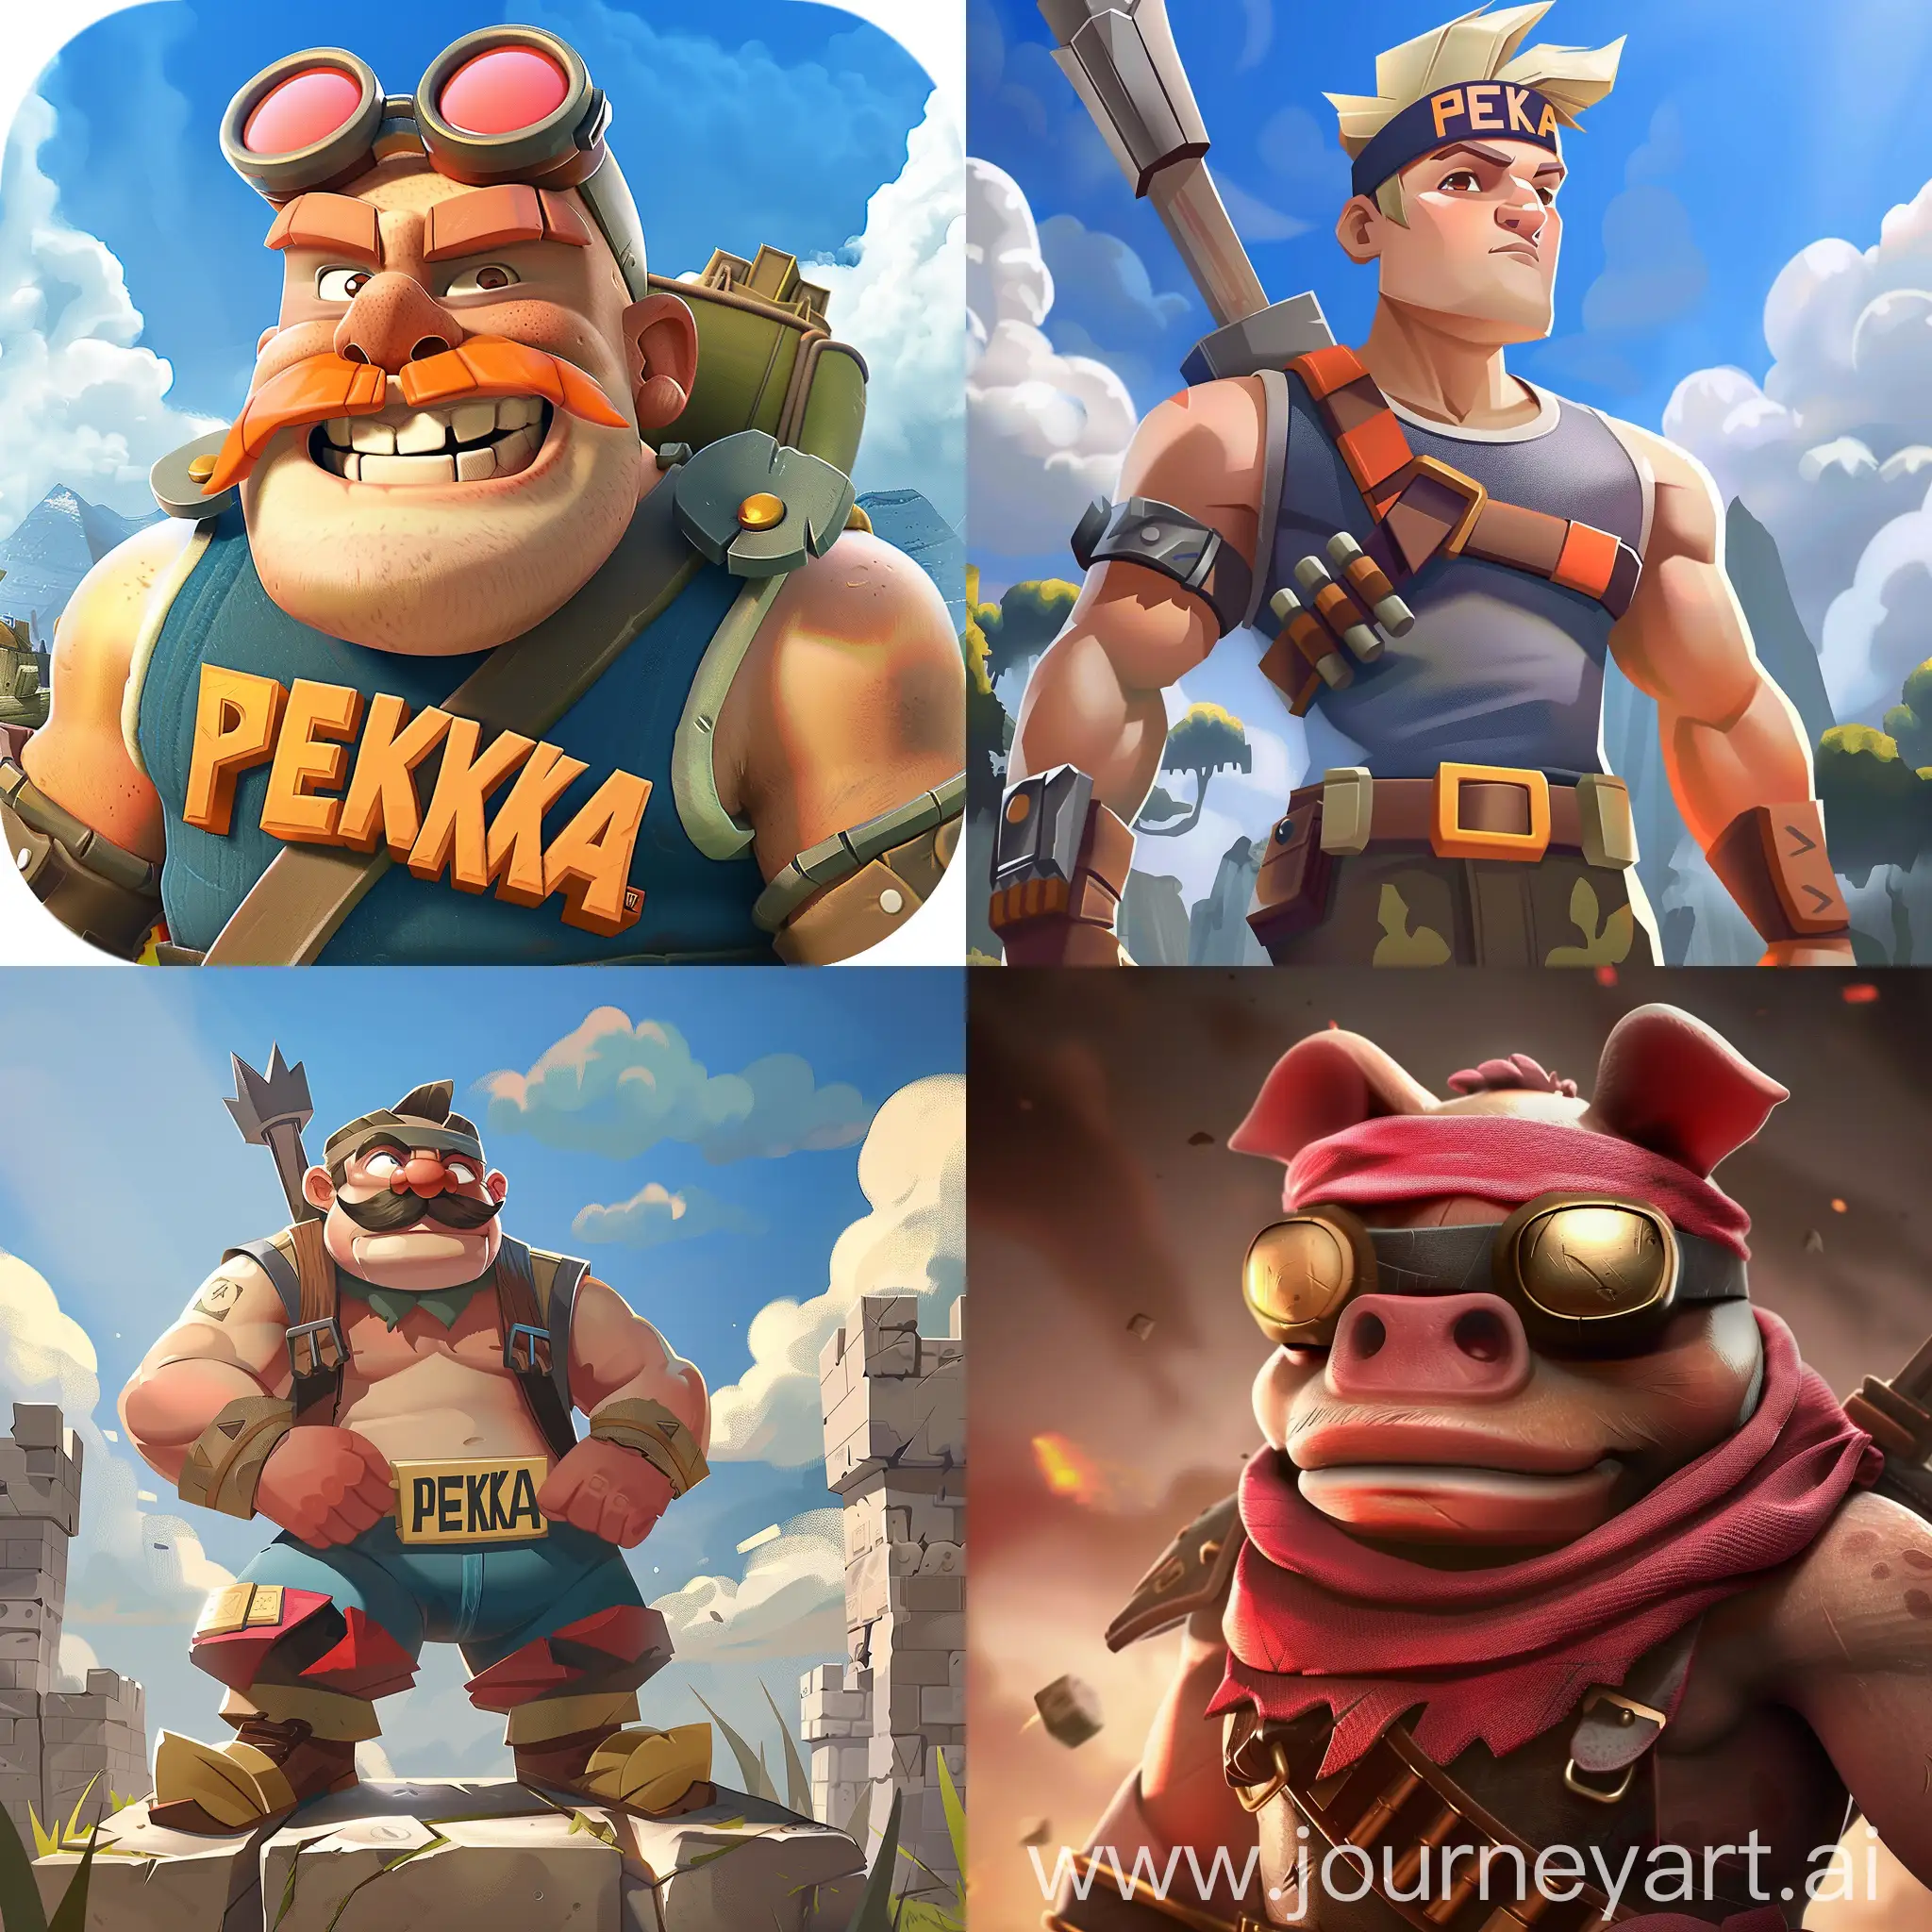 a semi cartoony picture for profile, clash royale style, picture of PEKKA with simple background.
